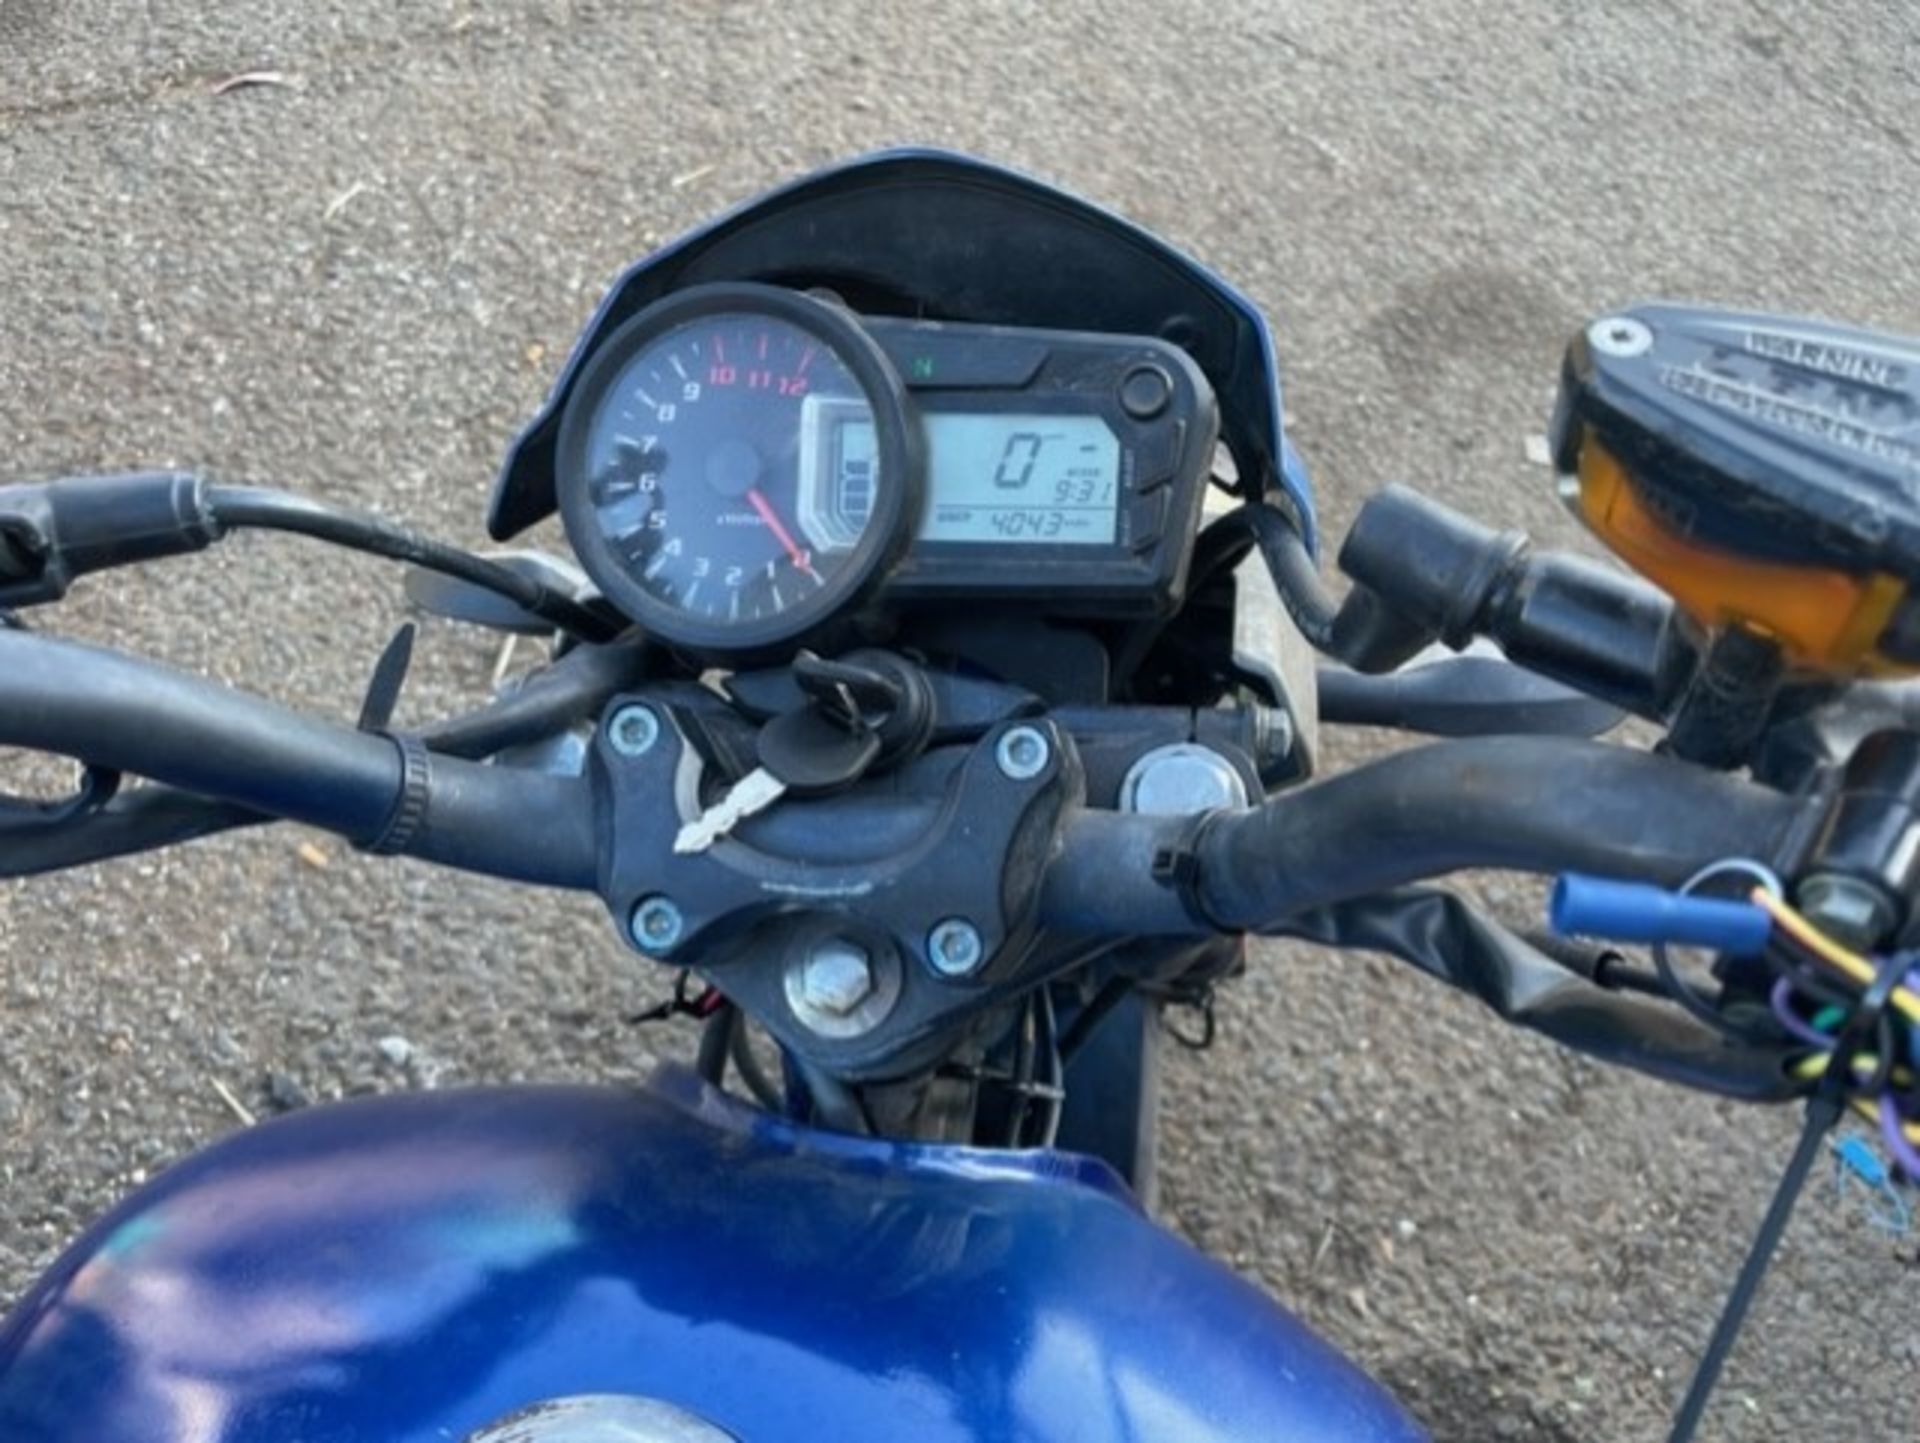 Zonnis 125 motorbike 4027 miles on the clock , MOT'D untill 25/05/24 - Image 6 of 7